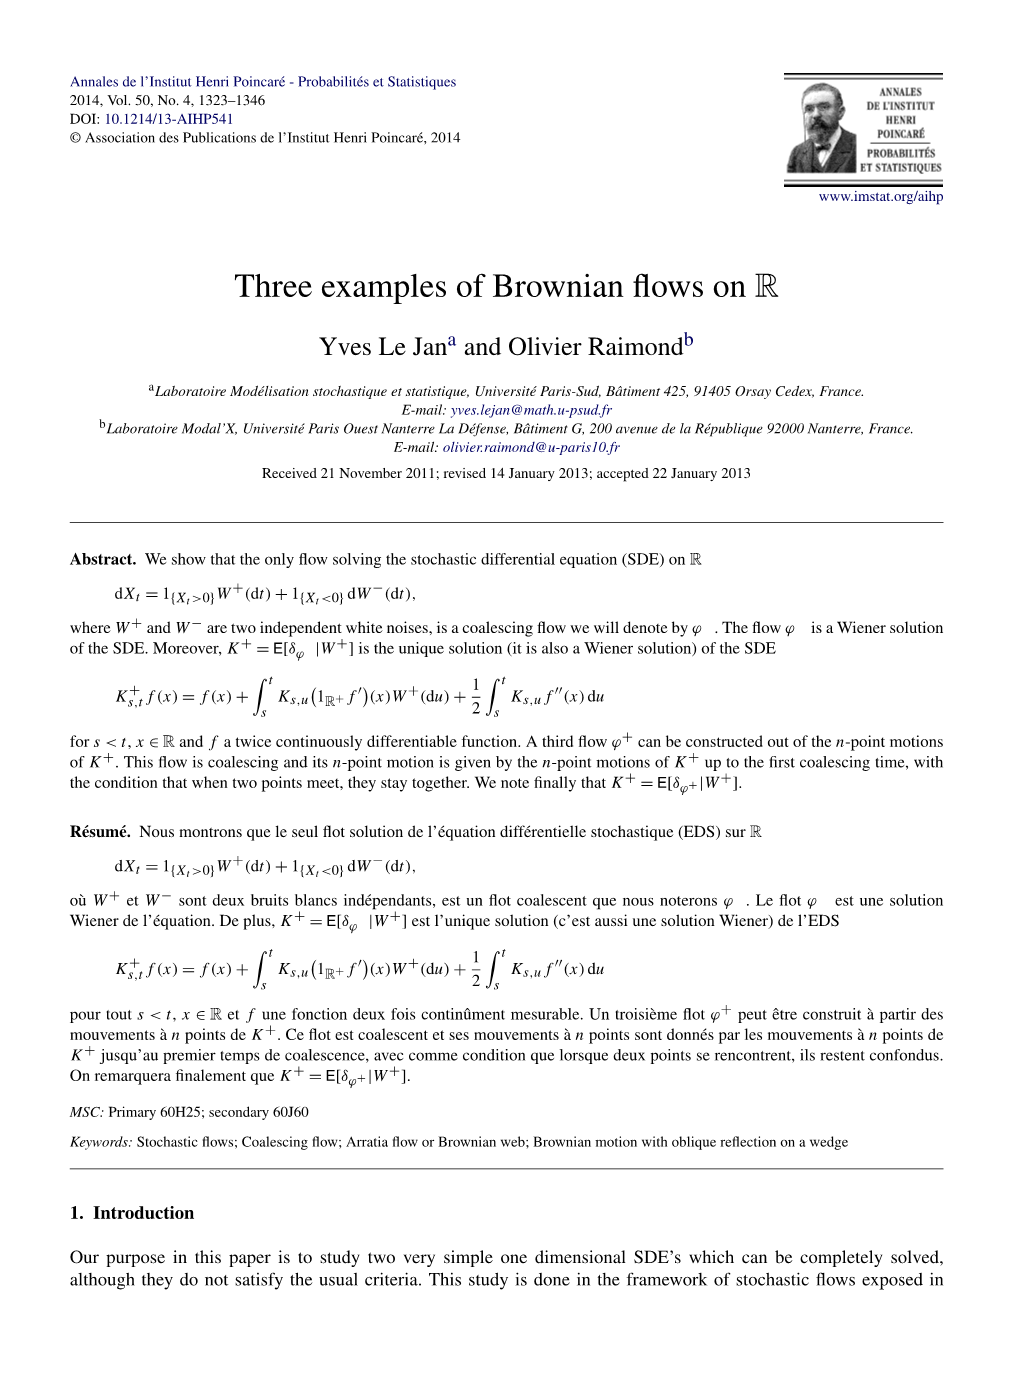 Three Examples of Brownian Flows on R